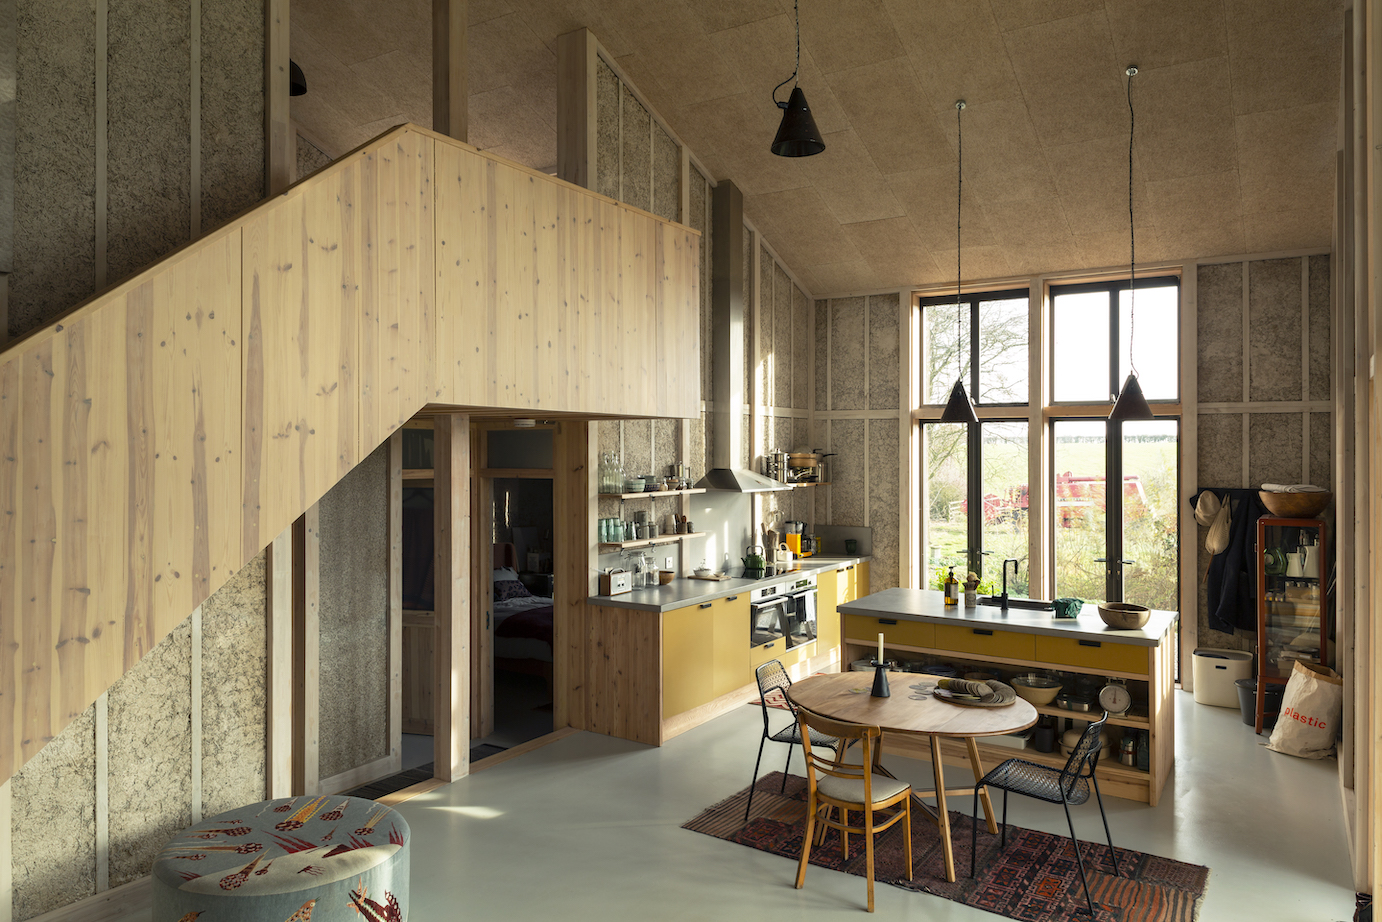  Inside the Flat House, designed by Material Cultures. (Photo: Oskar Proctor)